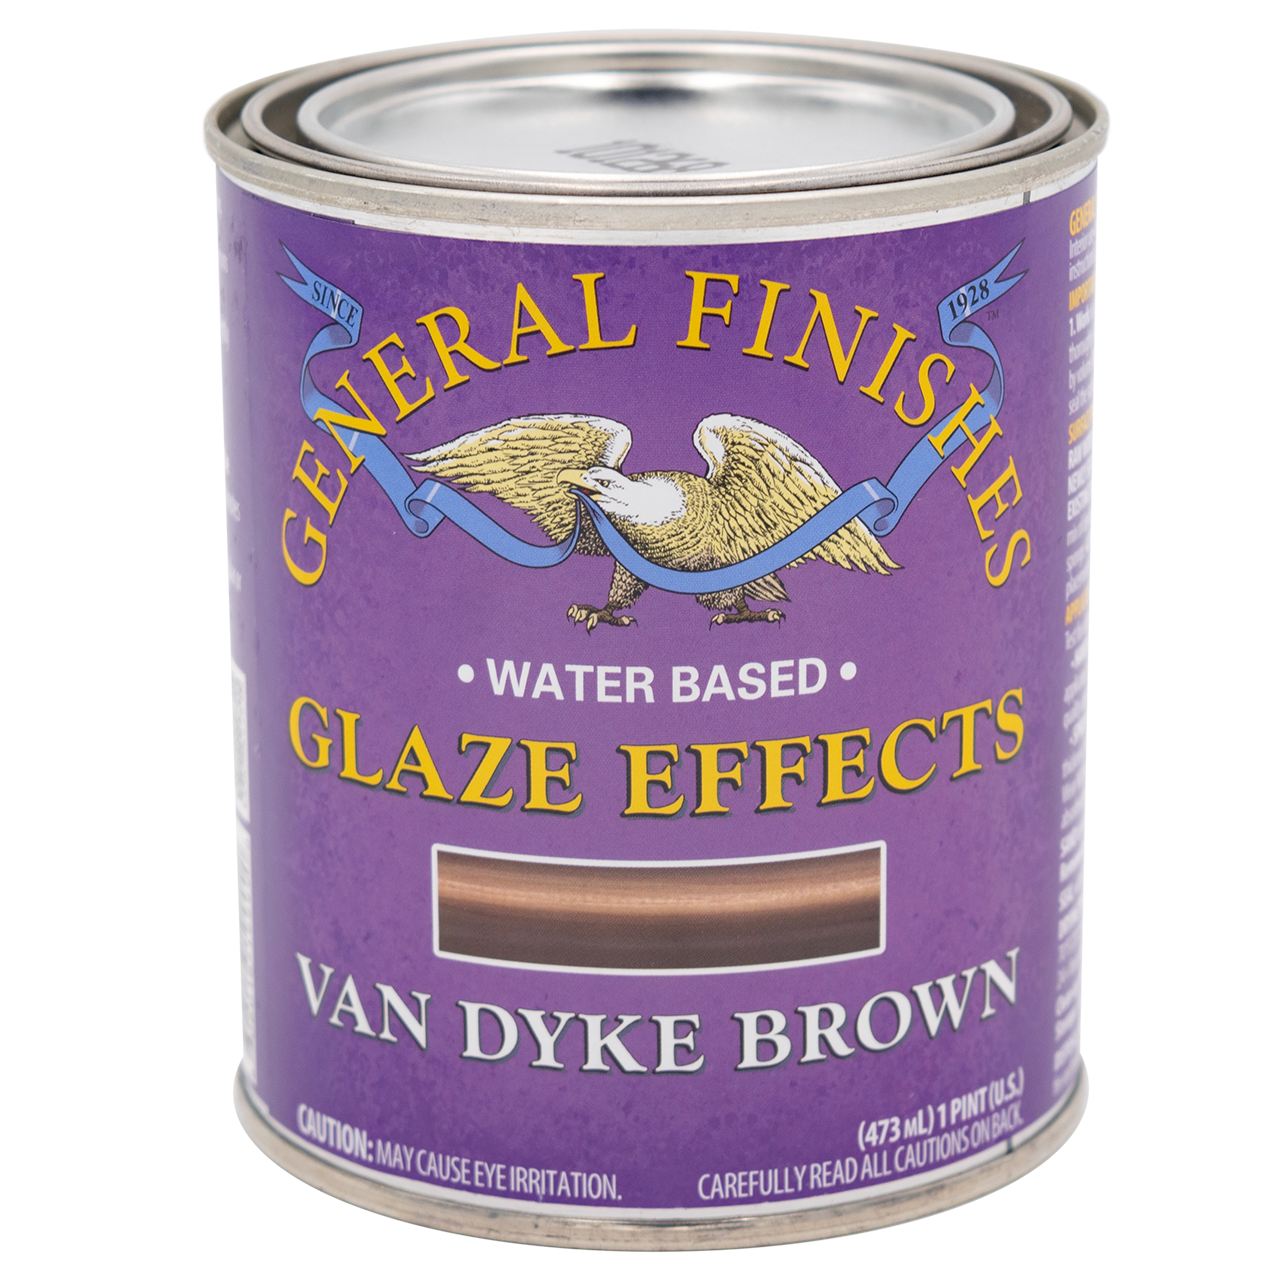 General Finishes Glaze Effects Van Dyke Brown Pint